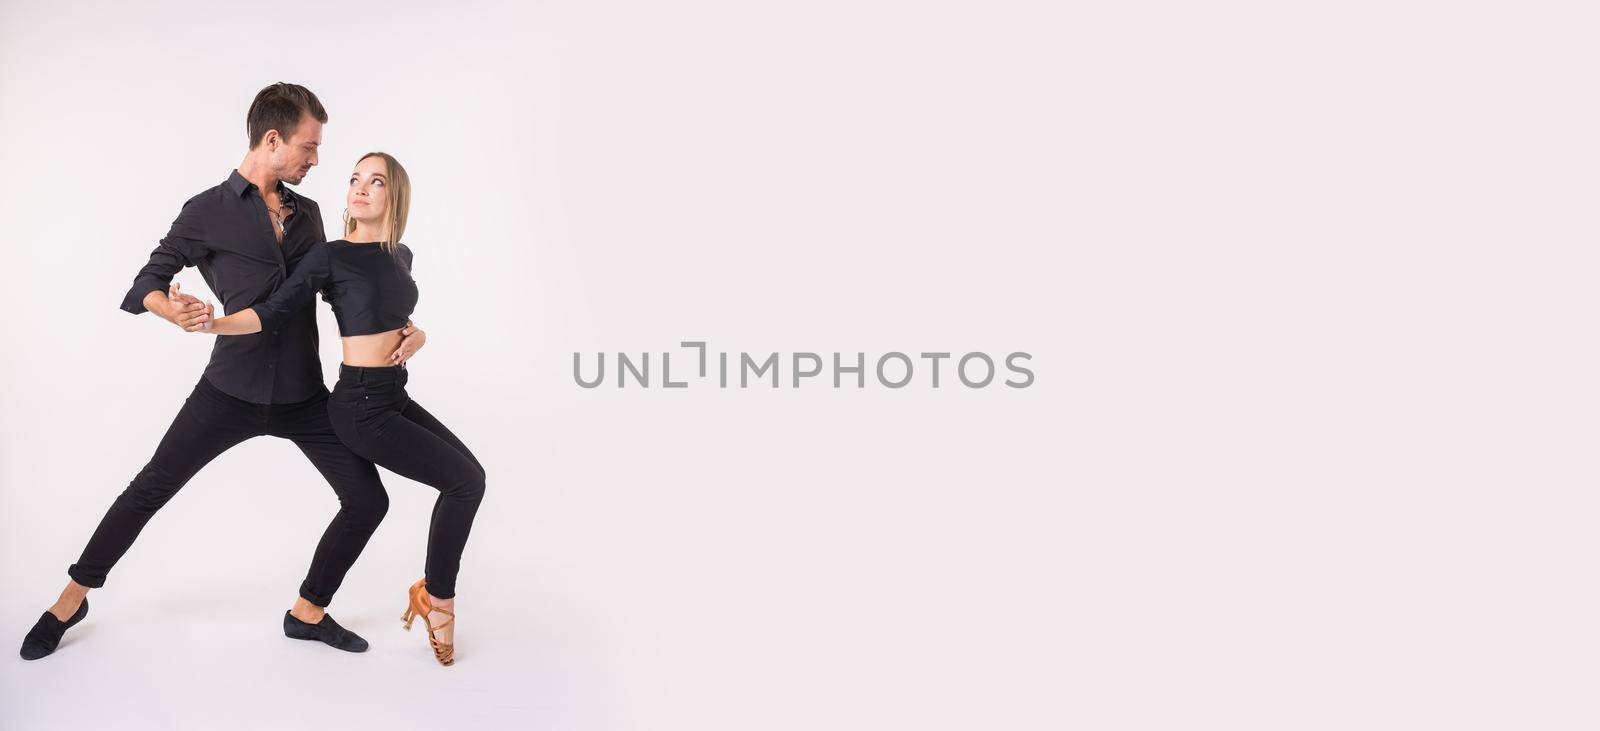 Bachata or salsa kizomba dancers on white background with copy space and place for text - Social dance and couple dancers concept